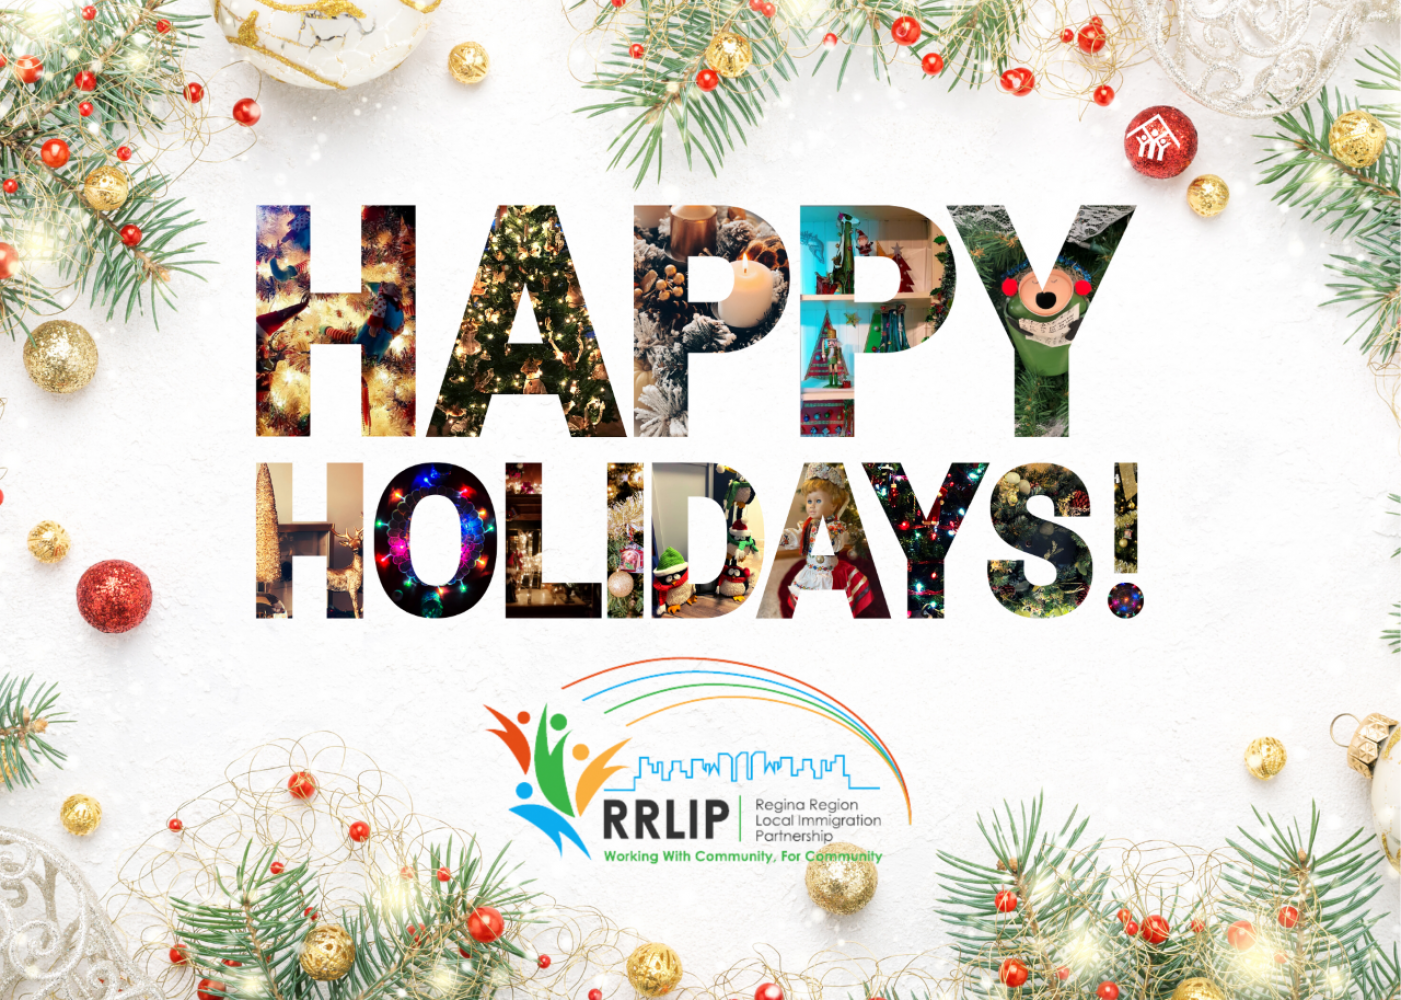 Happy Holidays from the RRLIP